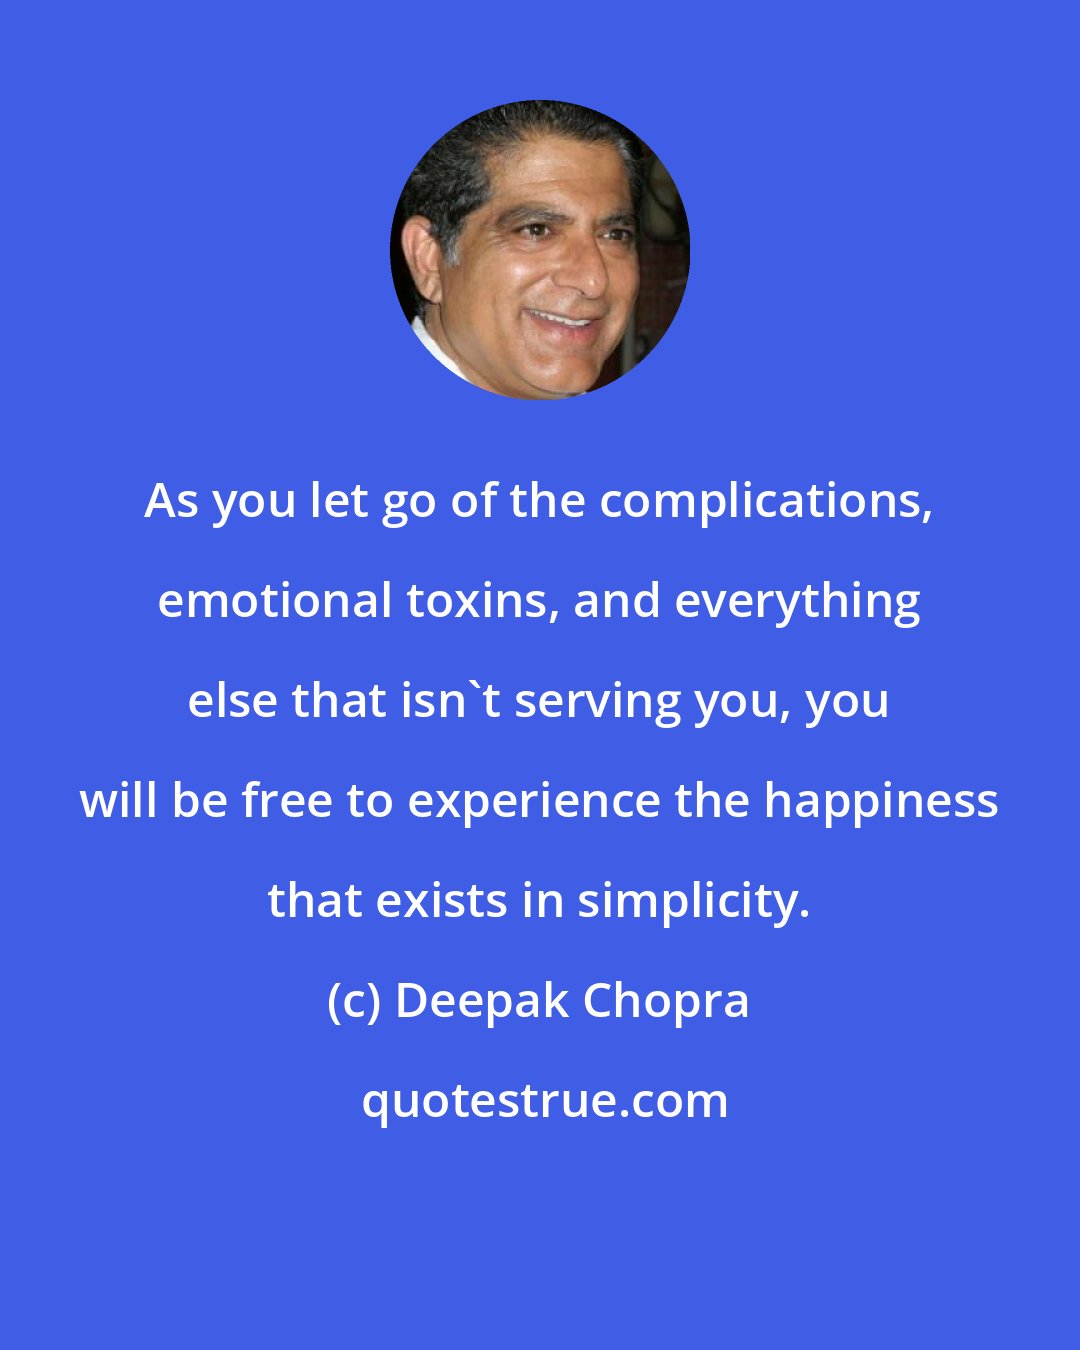 Deepak Chopra: As you let go of the complications, emotional toxins, and everything else that isn't serving you, you will be free to experience the happiness that exists in simplicity.